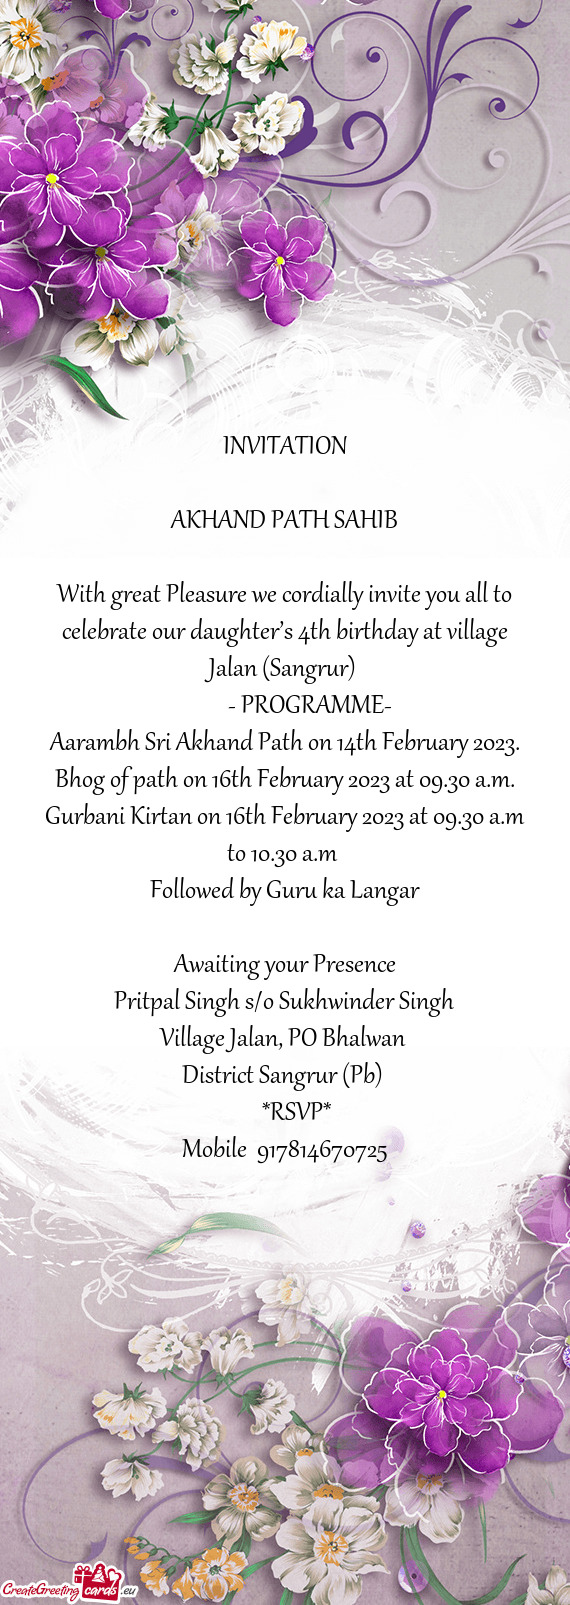 With great Pleasure we cordially invite you all to celebrate our daughter’s 4th birthday at villag